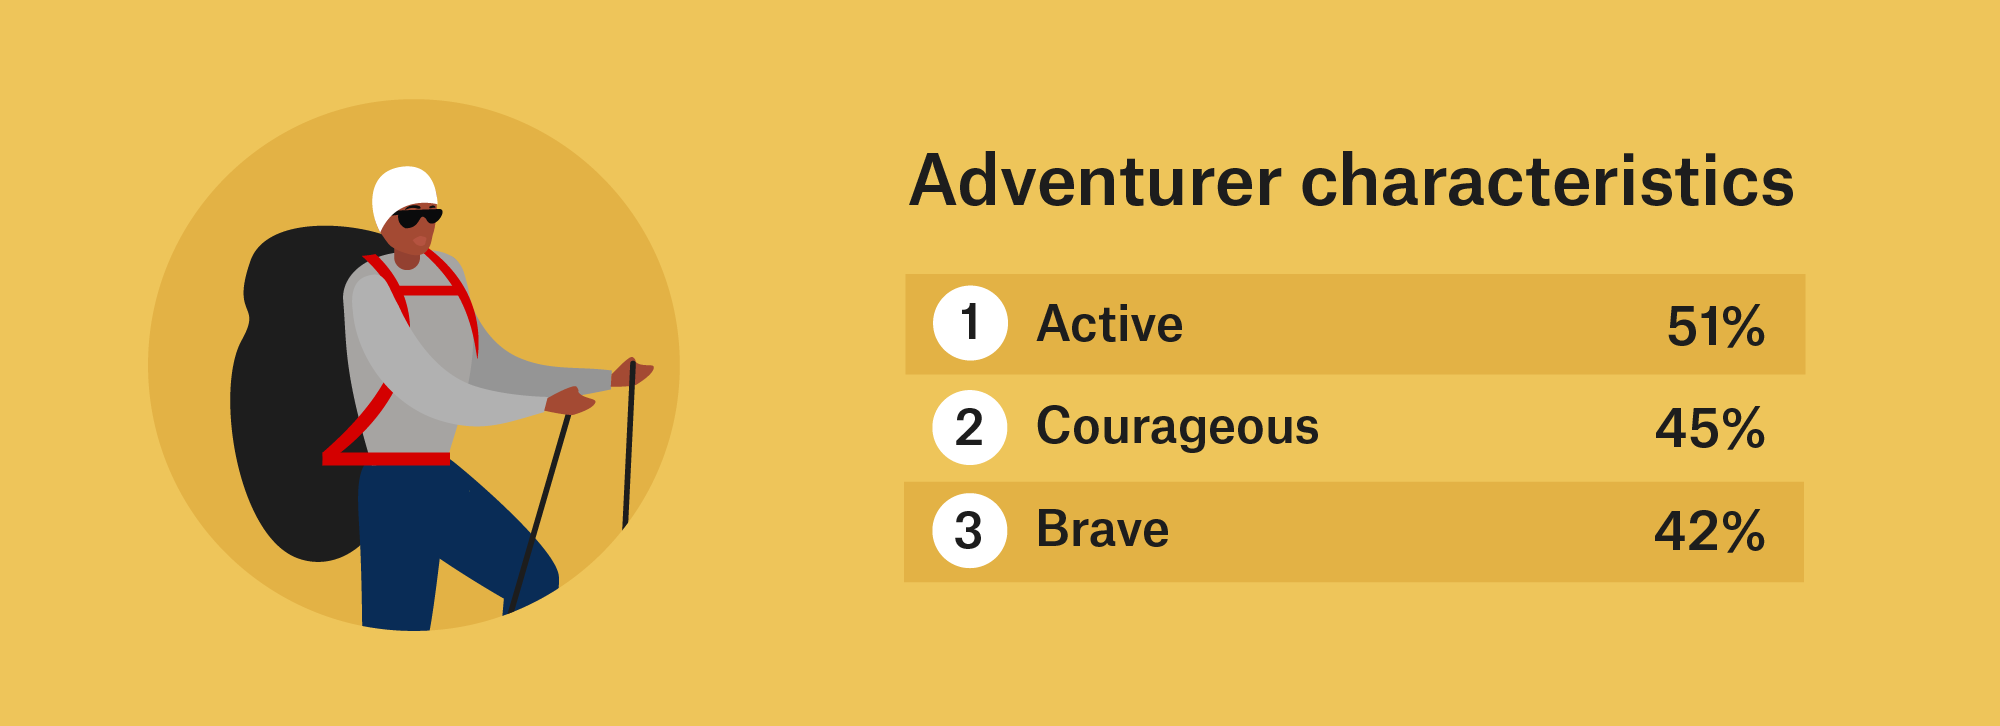 While the characteristics most associated with an adventurer were found to be active (51 per cent), courageous (45 per cent), and spirited (40 per cent).